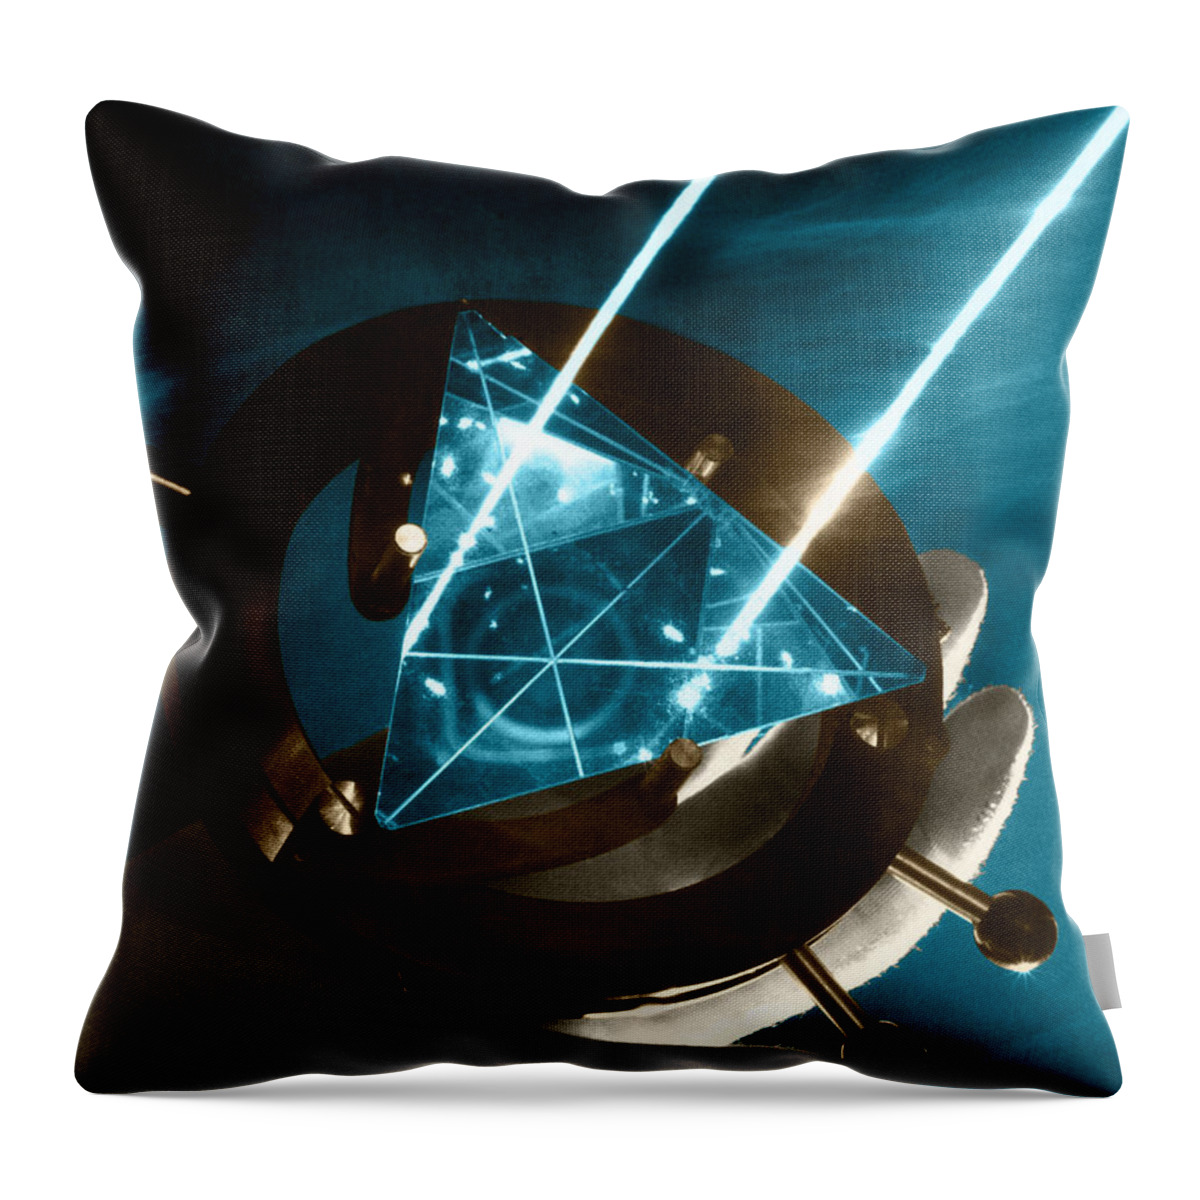 Prism Throw Pillow featuring the photograph Prism by Rapho Agence